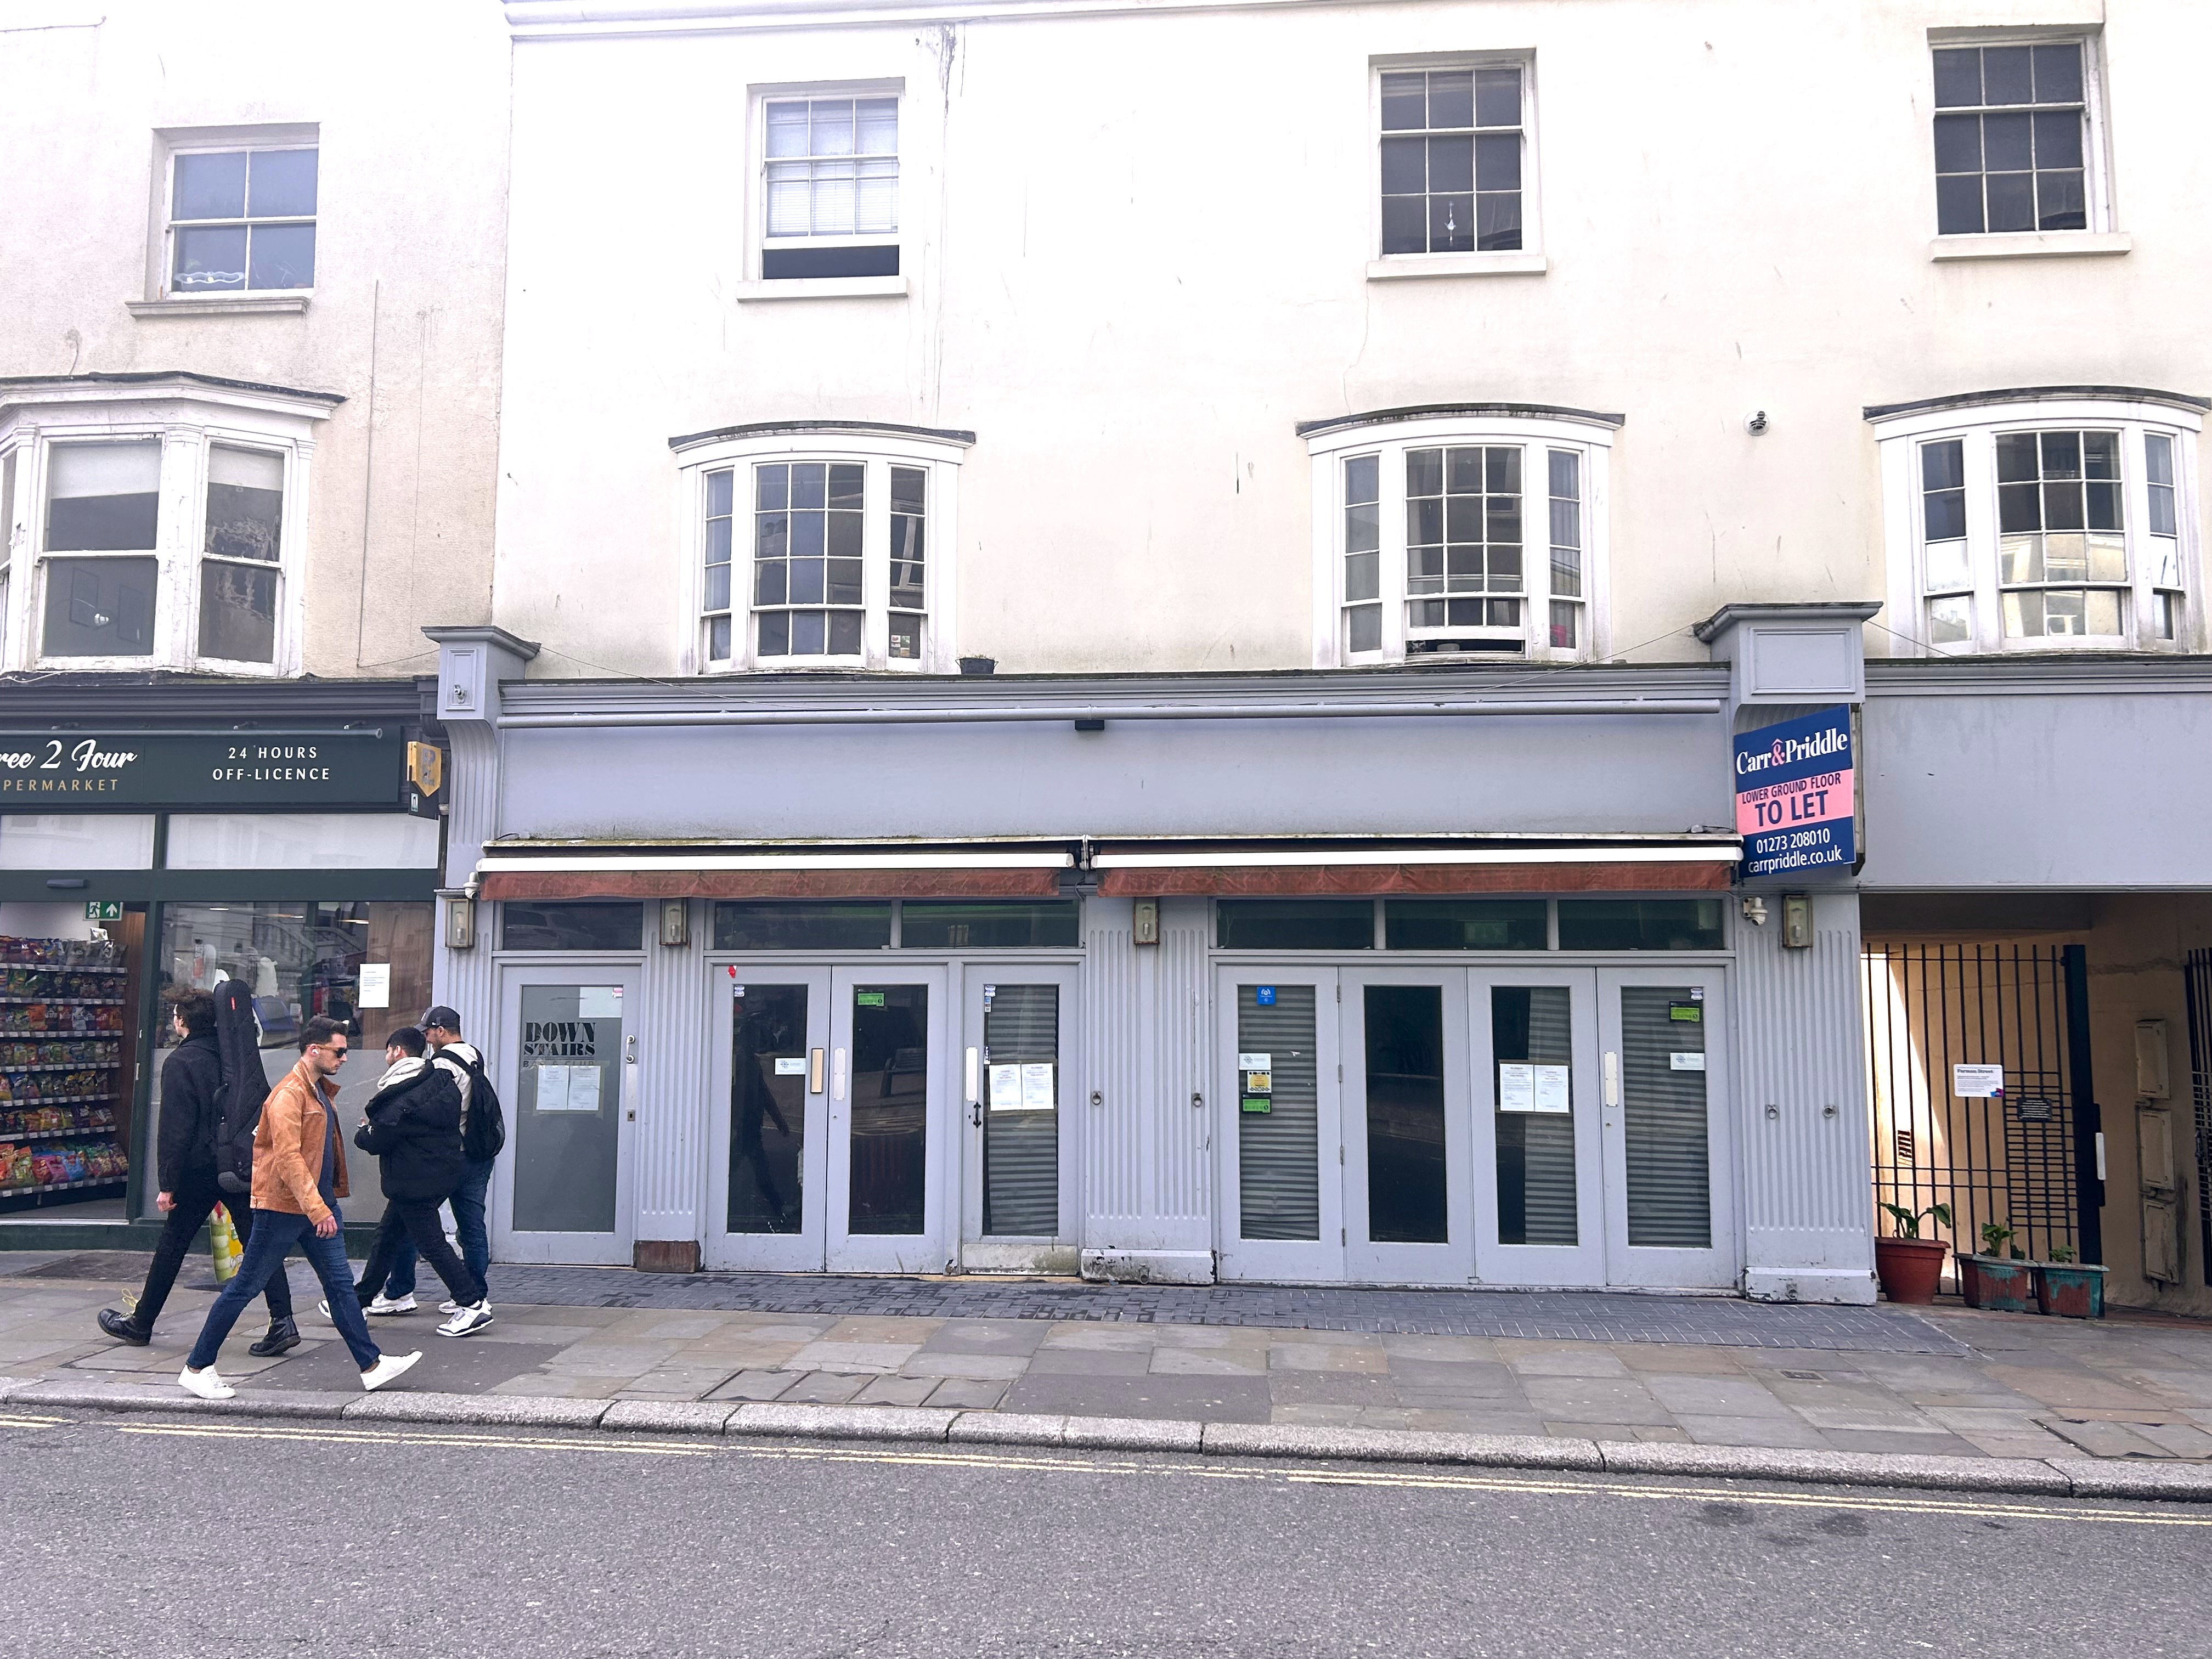 0 bed Pub for rent in Hove. From PS&B - Carr & Priddle - Brighton